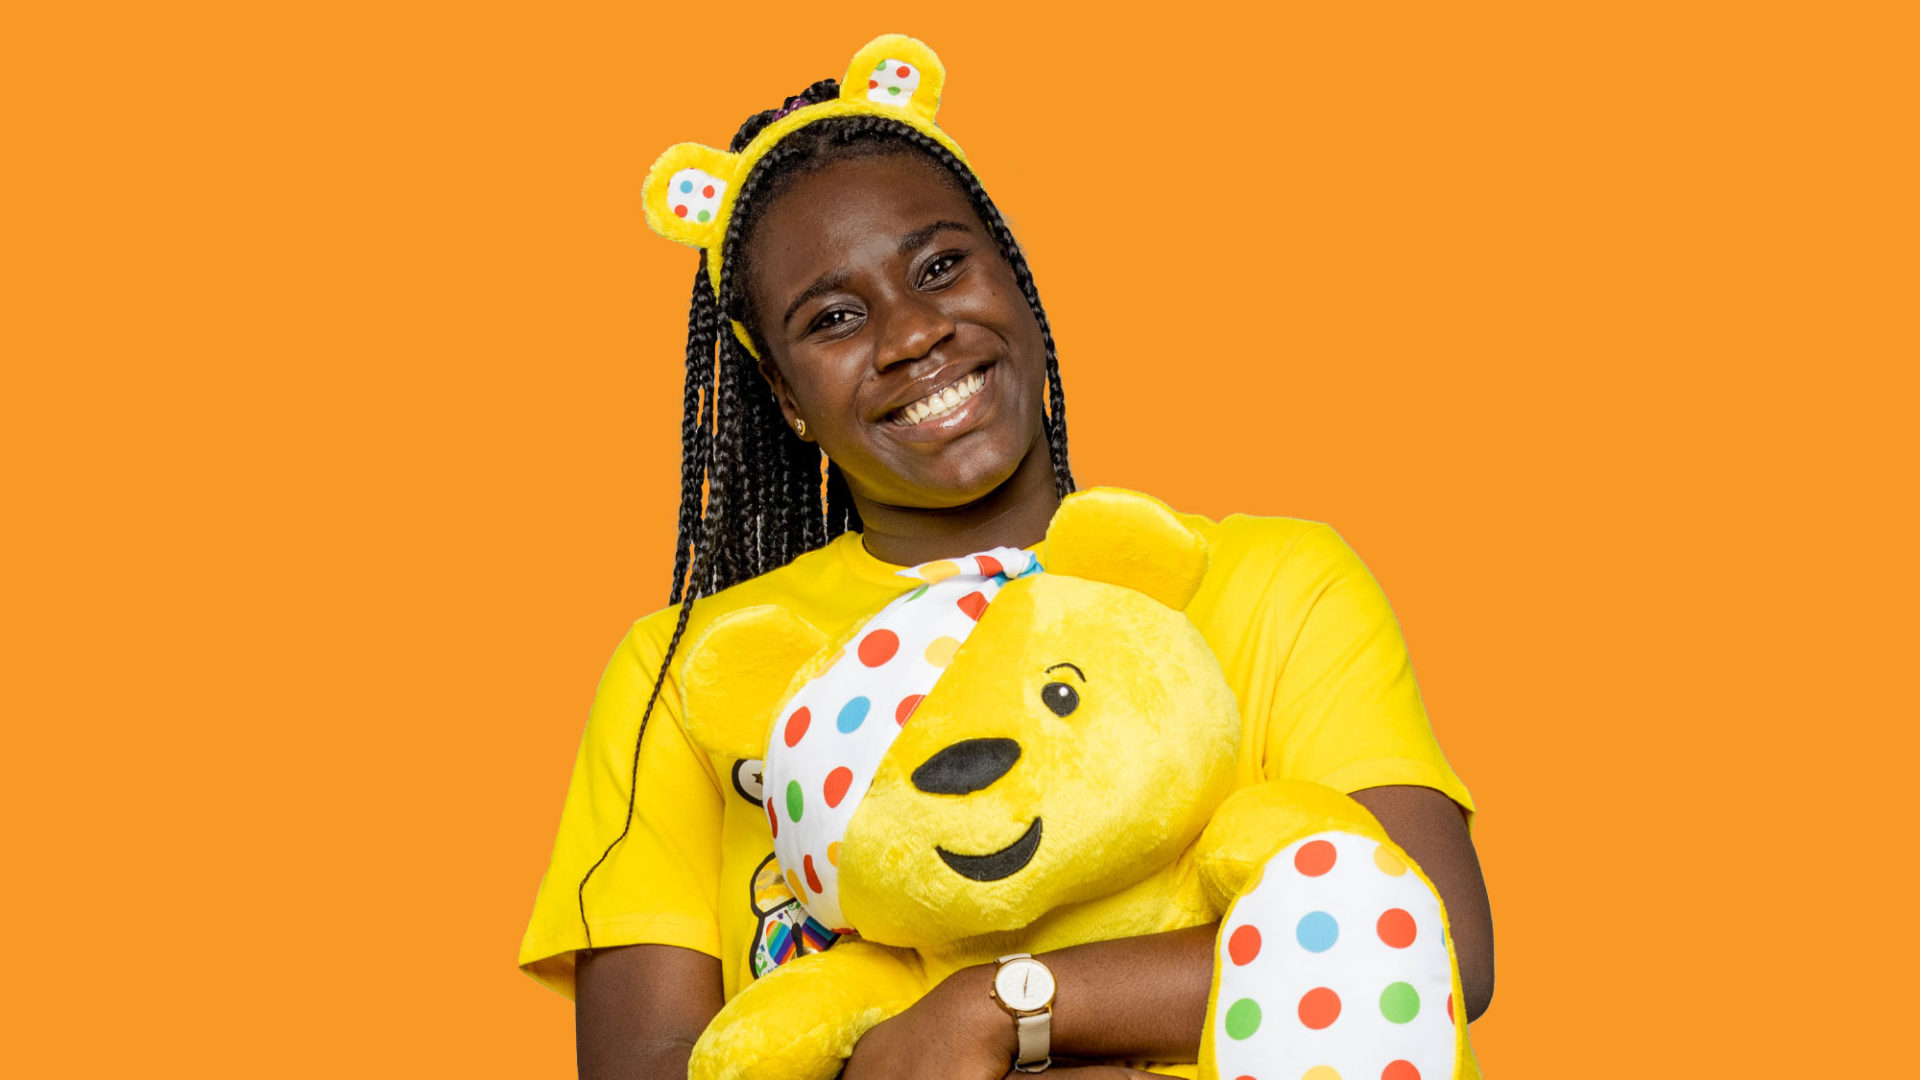 Ore holding a pudsey bear toy and wearing pudsey ears